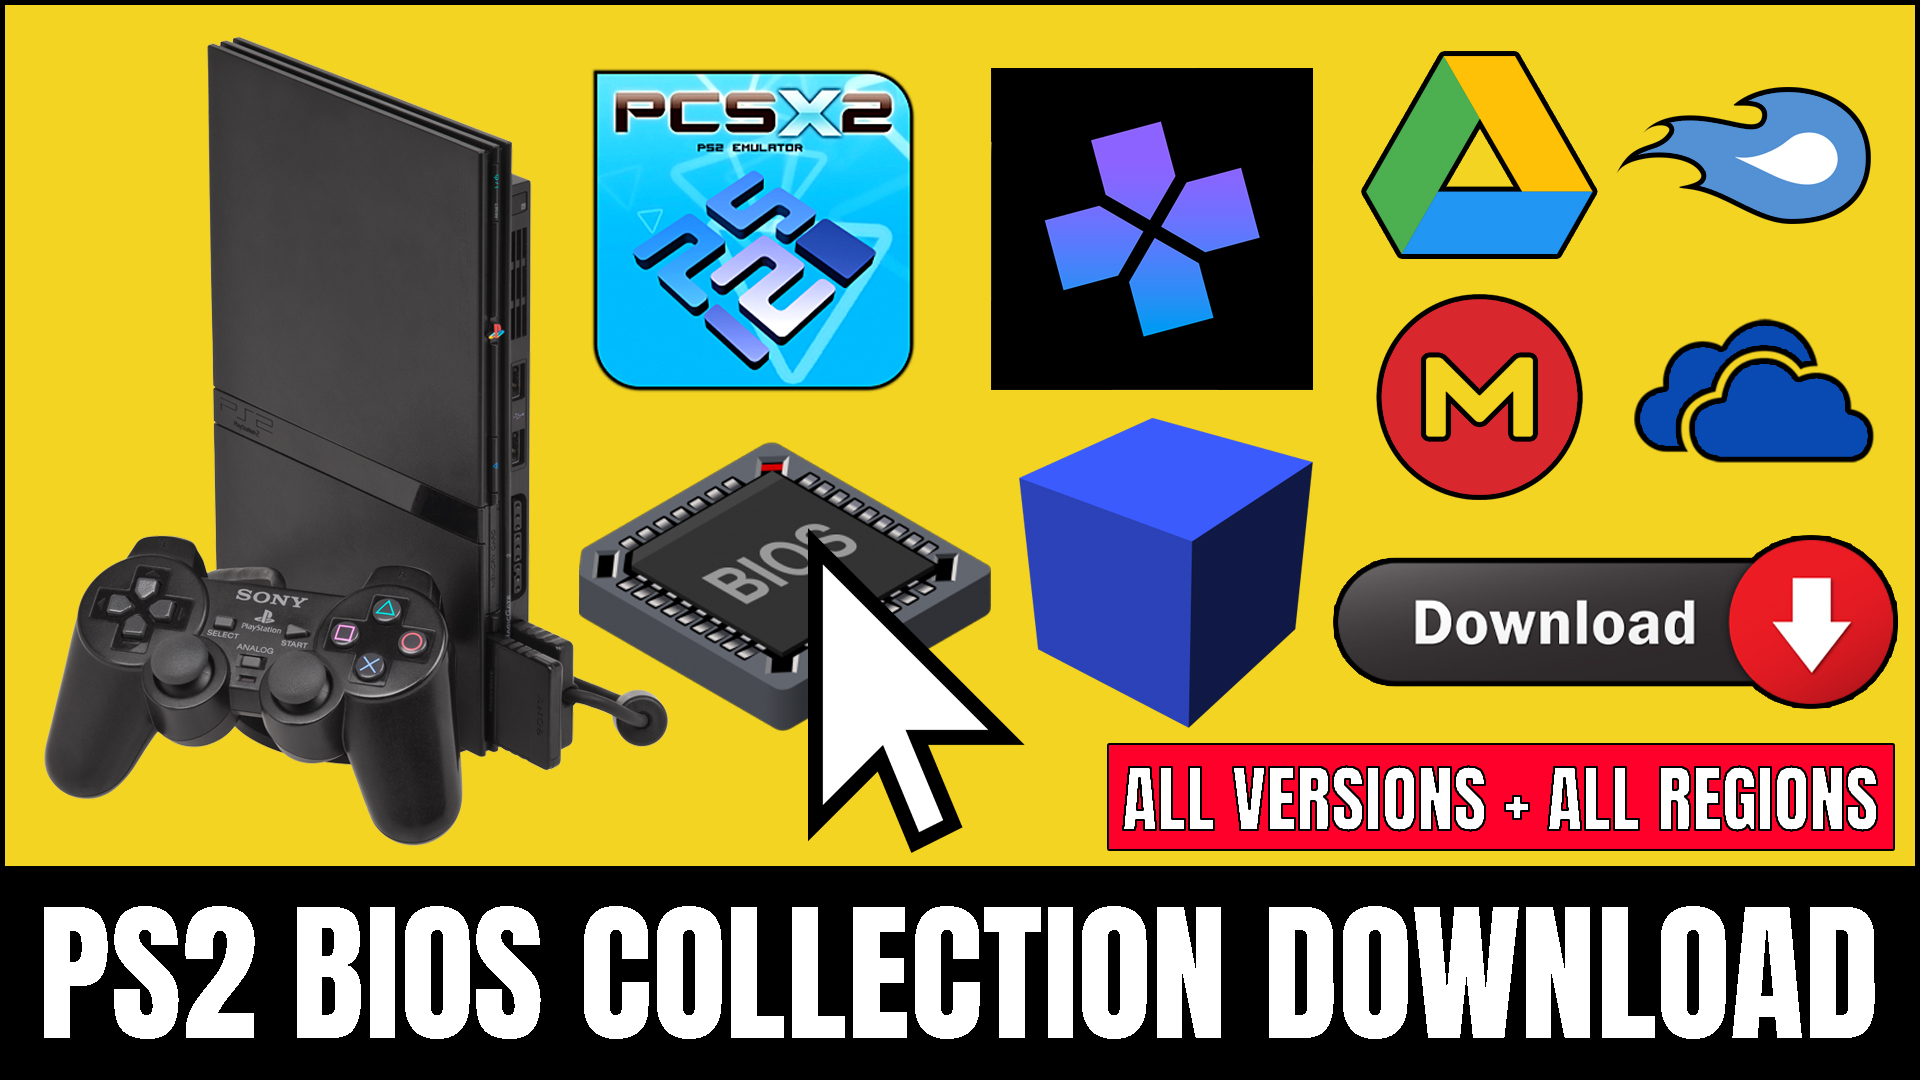 PS2 BIOS Collection Download